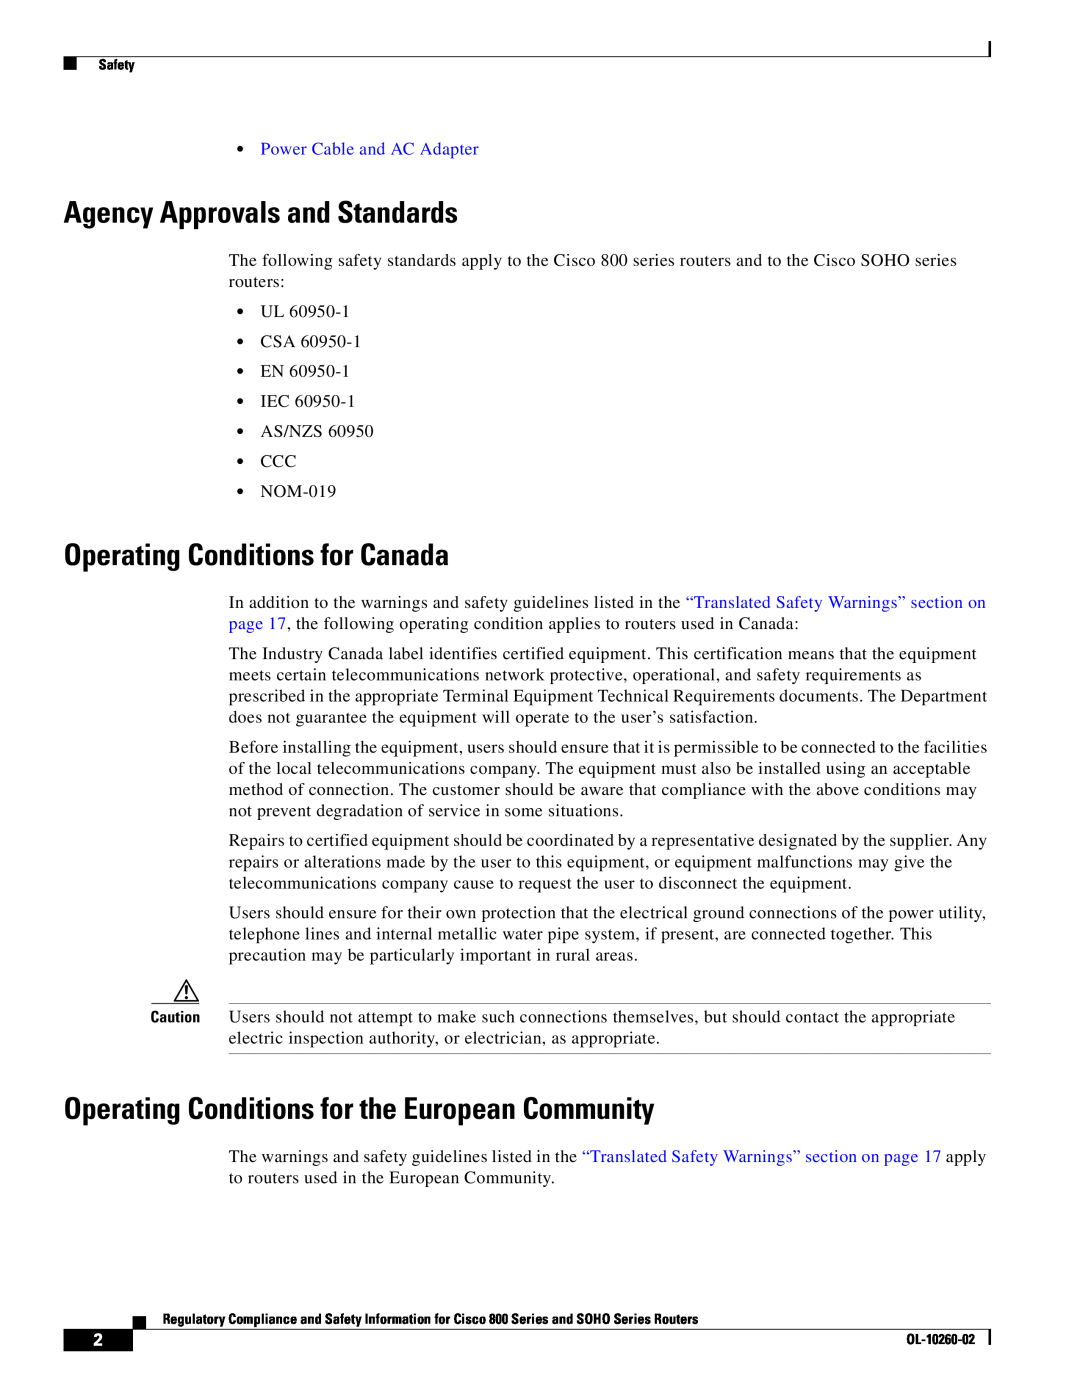 Cisco Systems SOHO Series Agency Approvals and Standards, Operating Conditions for Canada, Power Cable and AC Adapter 